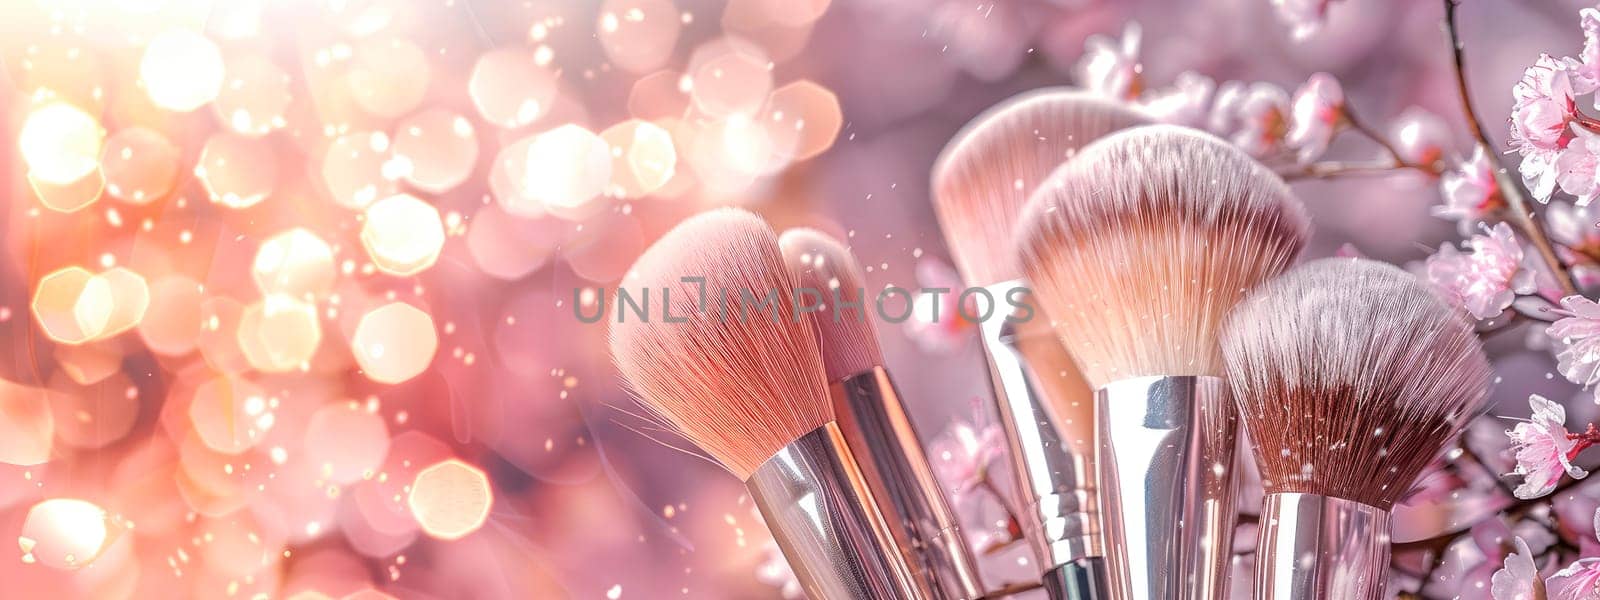 makeup brush on a background of flowers. selective focus. by yanadjana